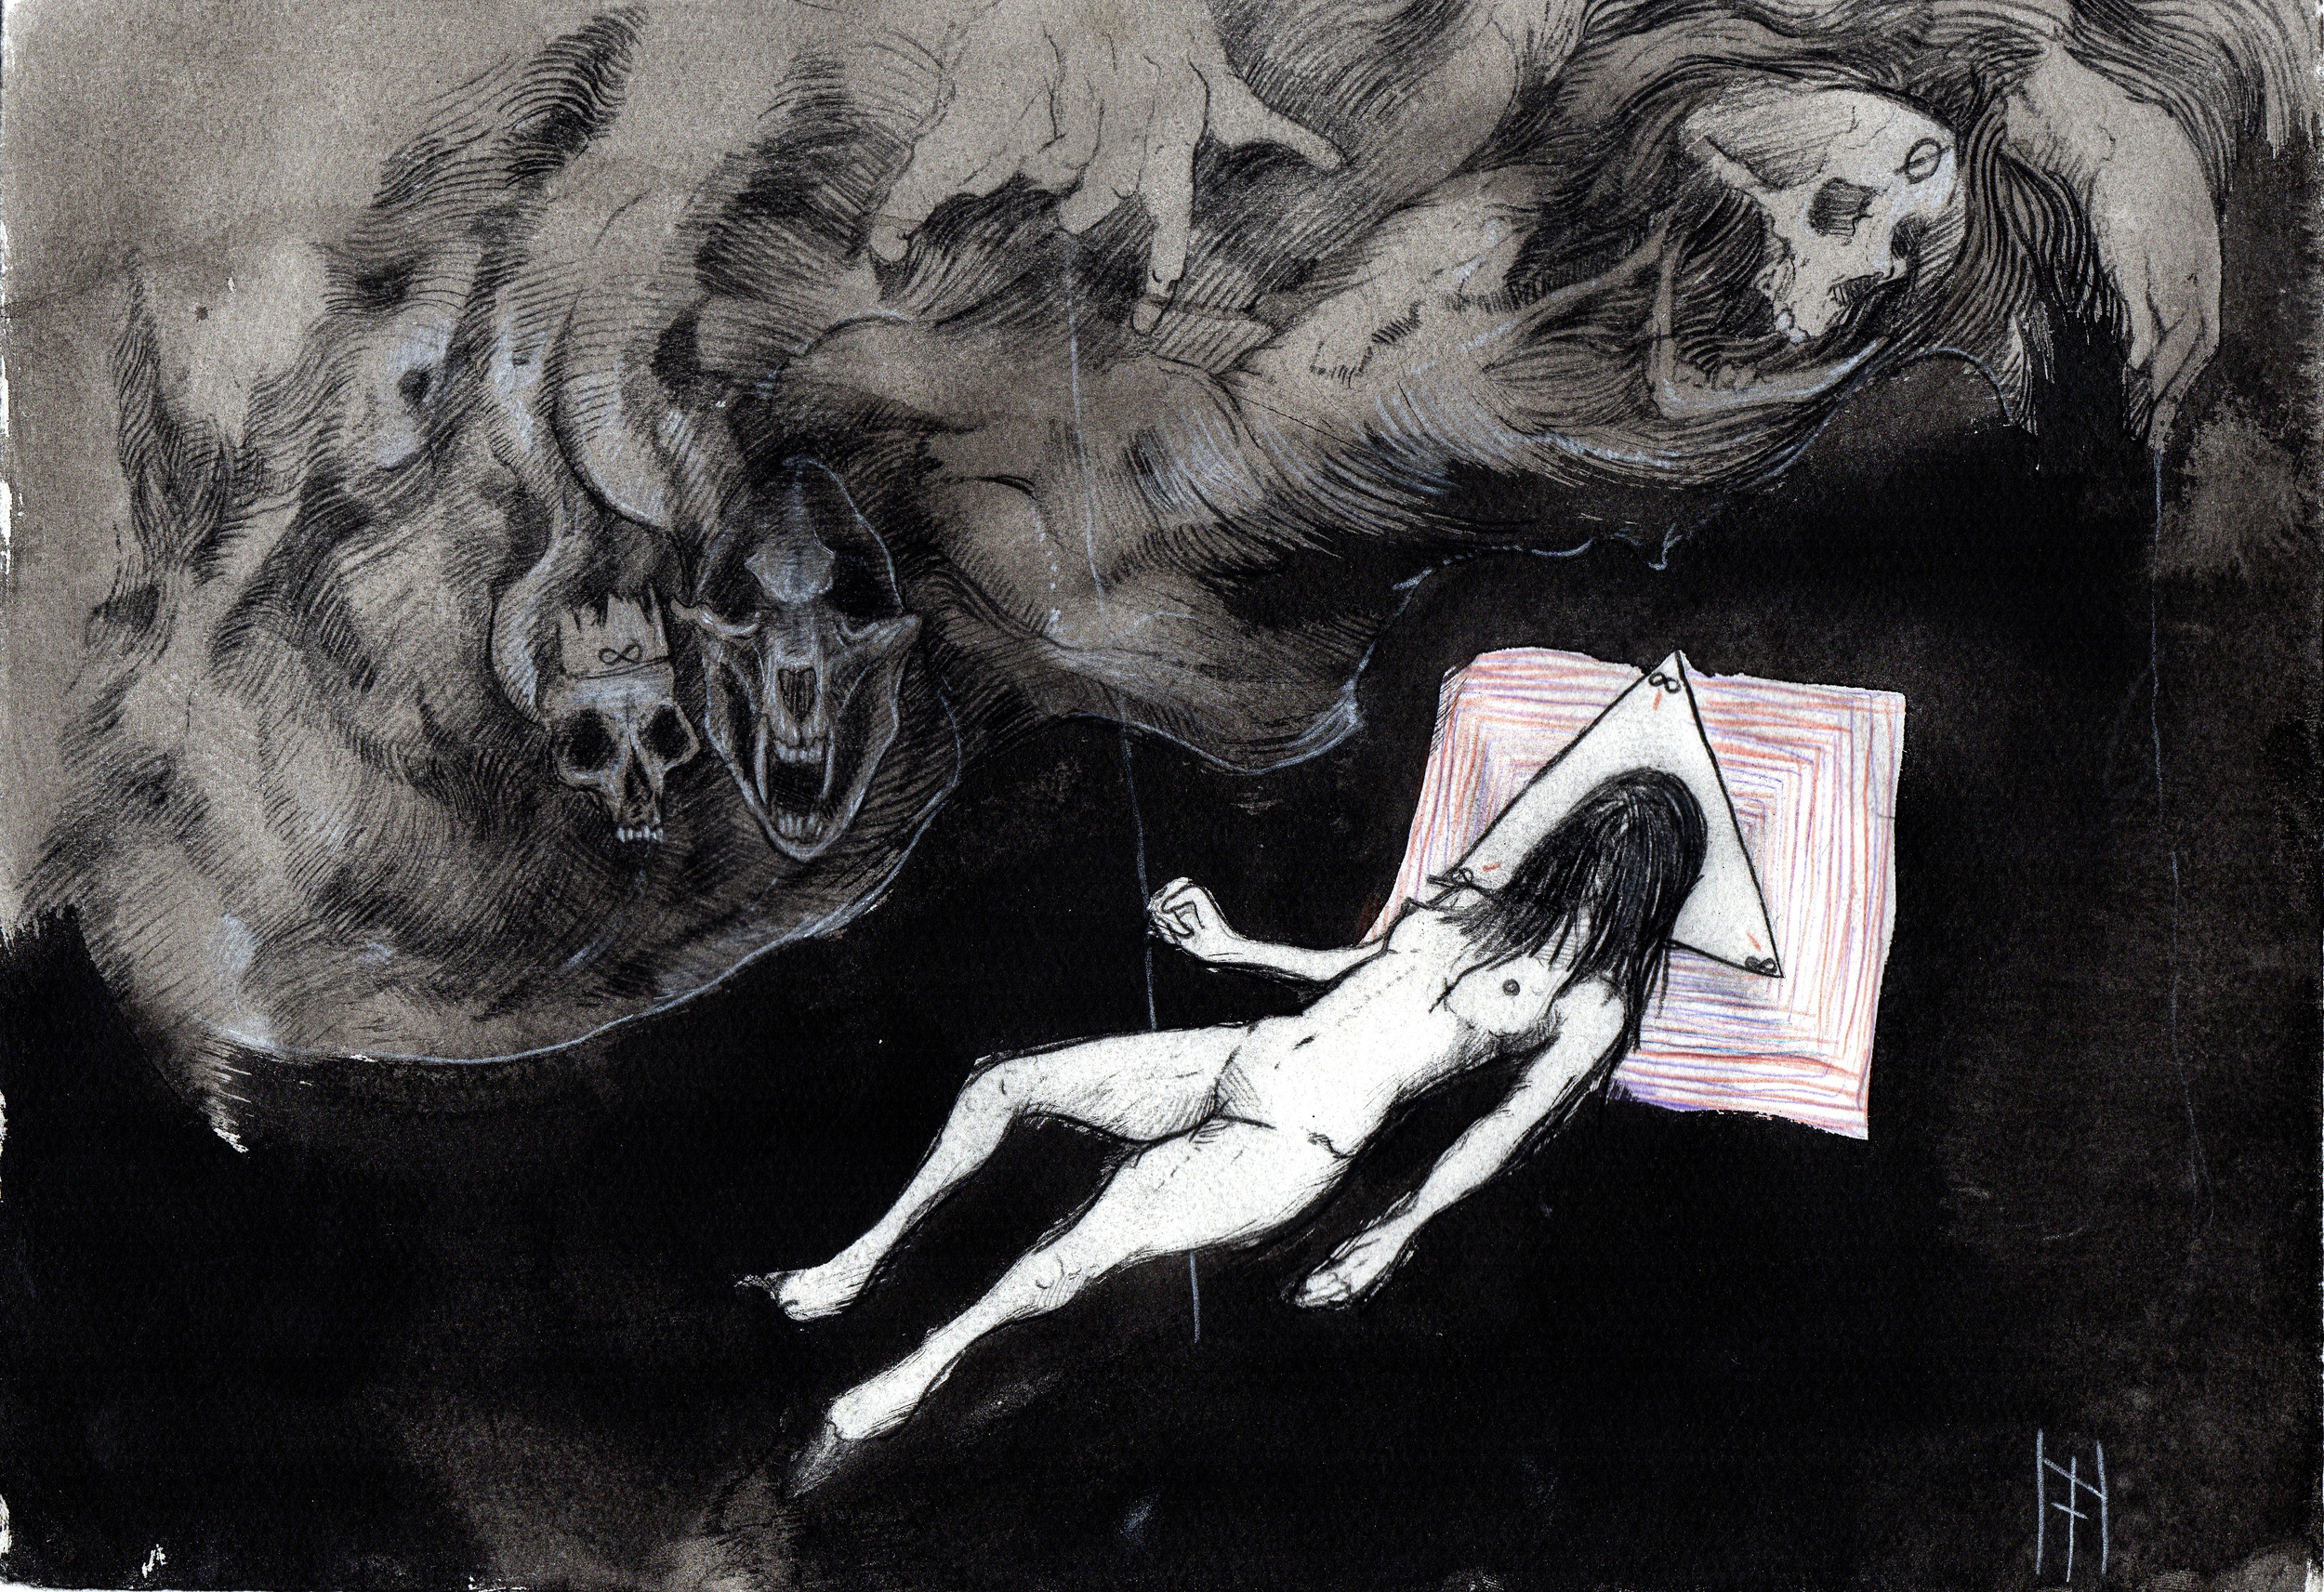    Eternal Returning  . 2013. 15 x 12 inches. Ink wash on paper. 